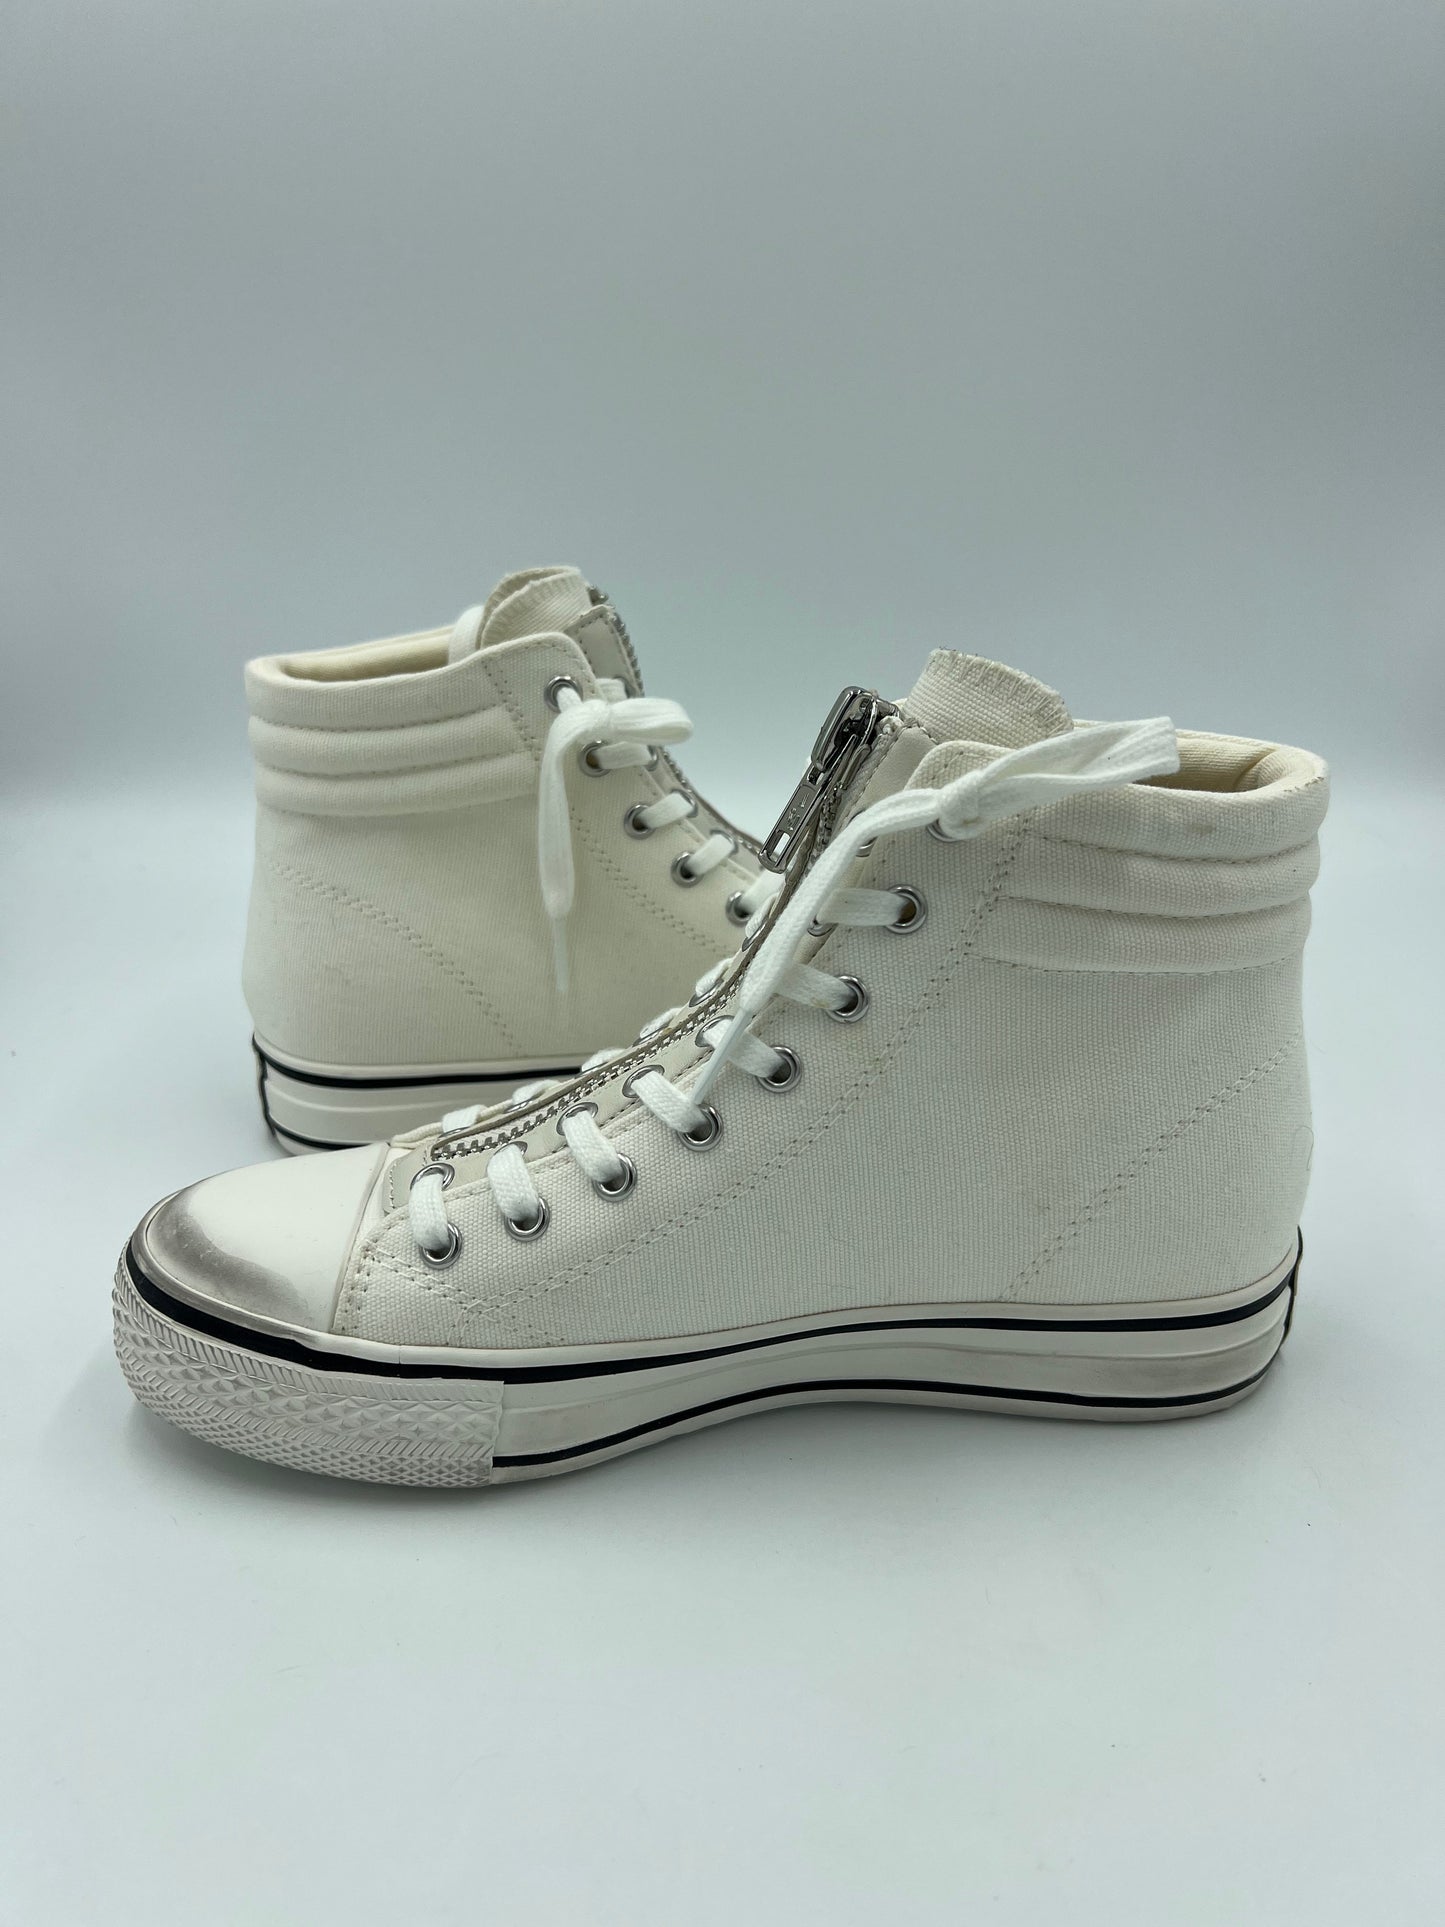 New! Shoes Sneakers By Ash  Size: 5.5